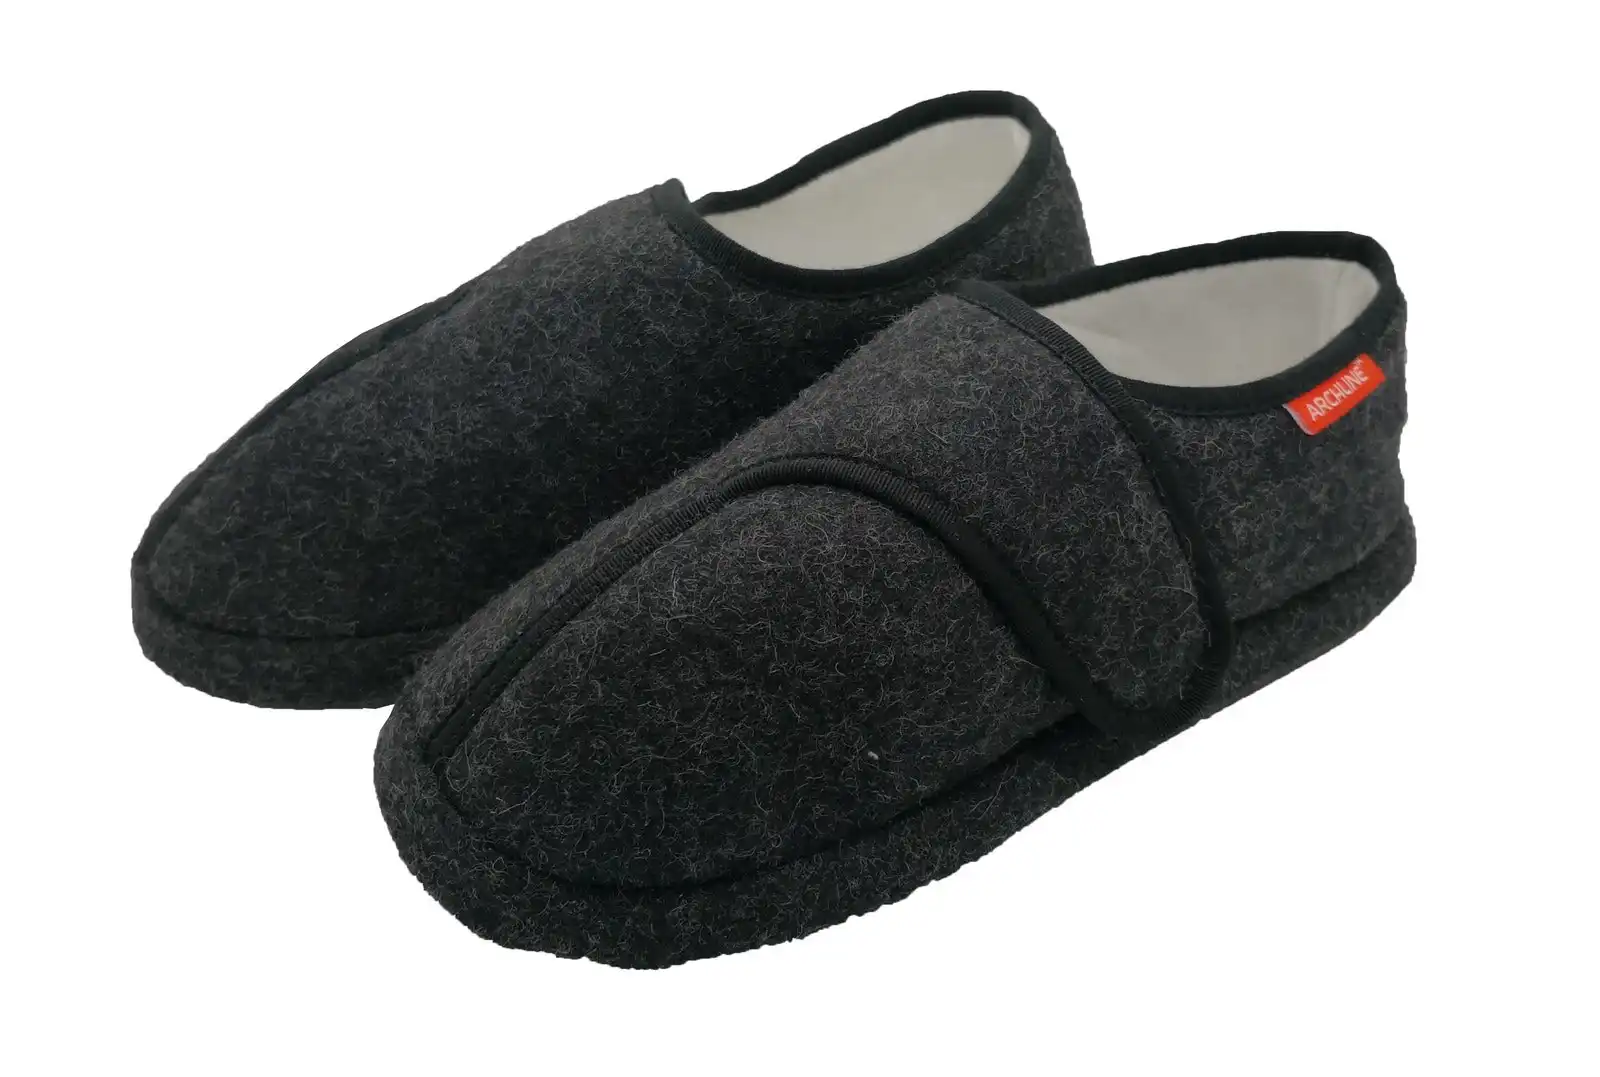 Archline Orthotic Plus Slippers Closed Scuffs Medical Pain Relief Moccasins